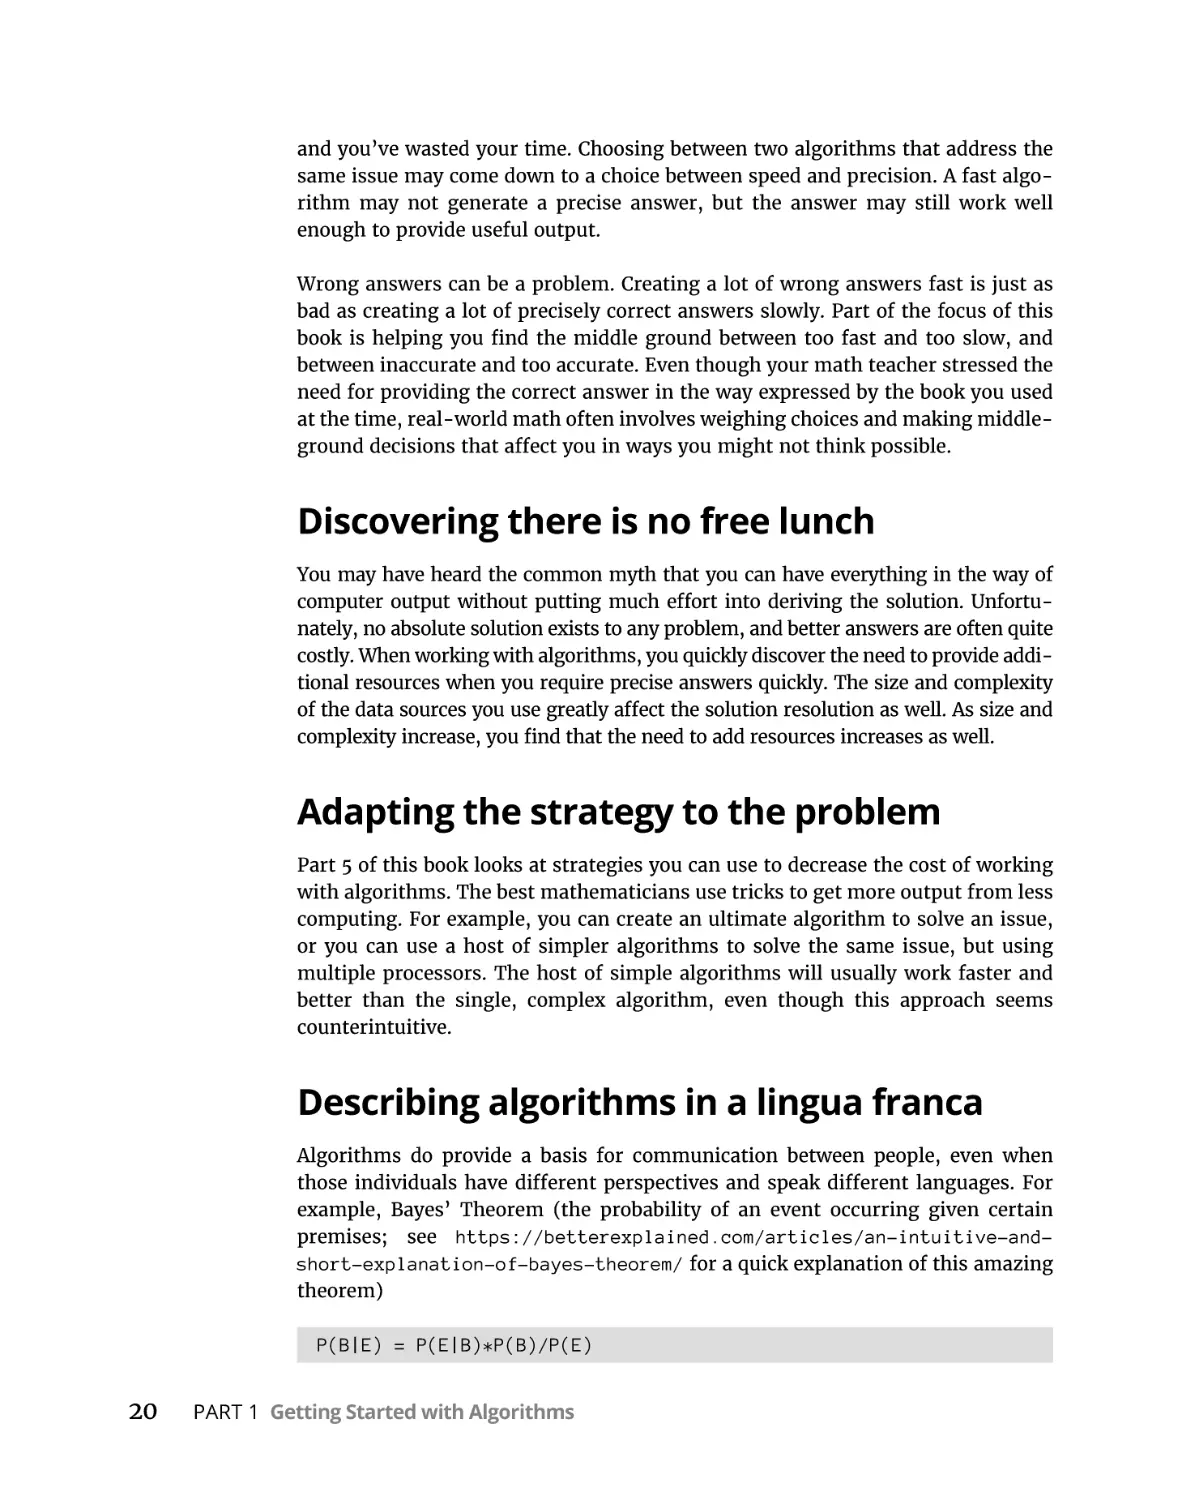 Discovering there is no free lunch
Adapting the strategy to the problem
Describing algorithms in a lingua franca